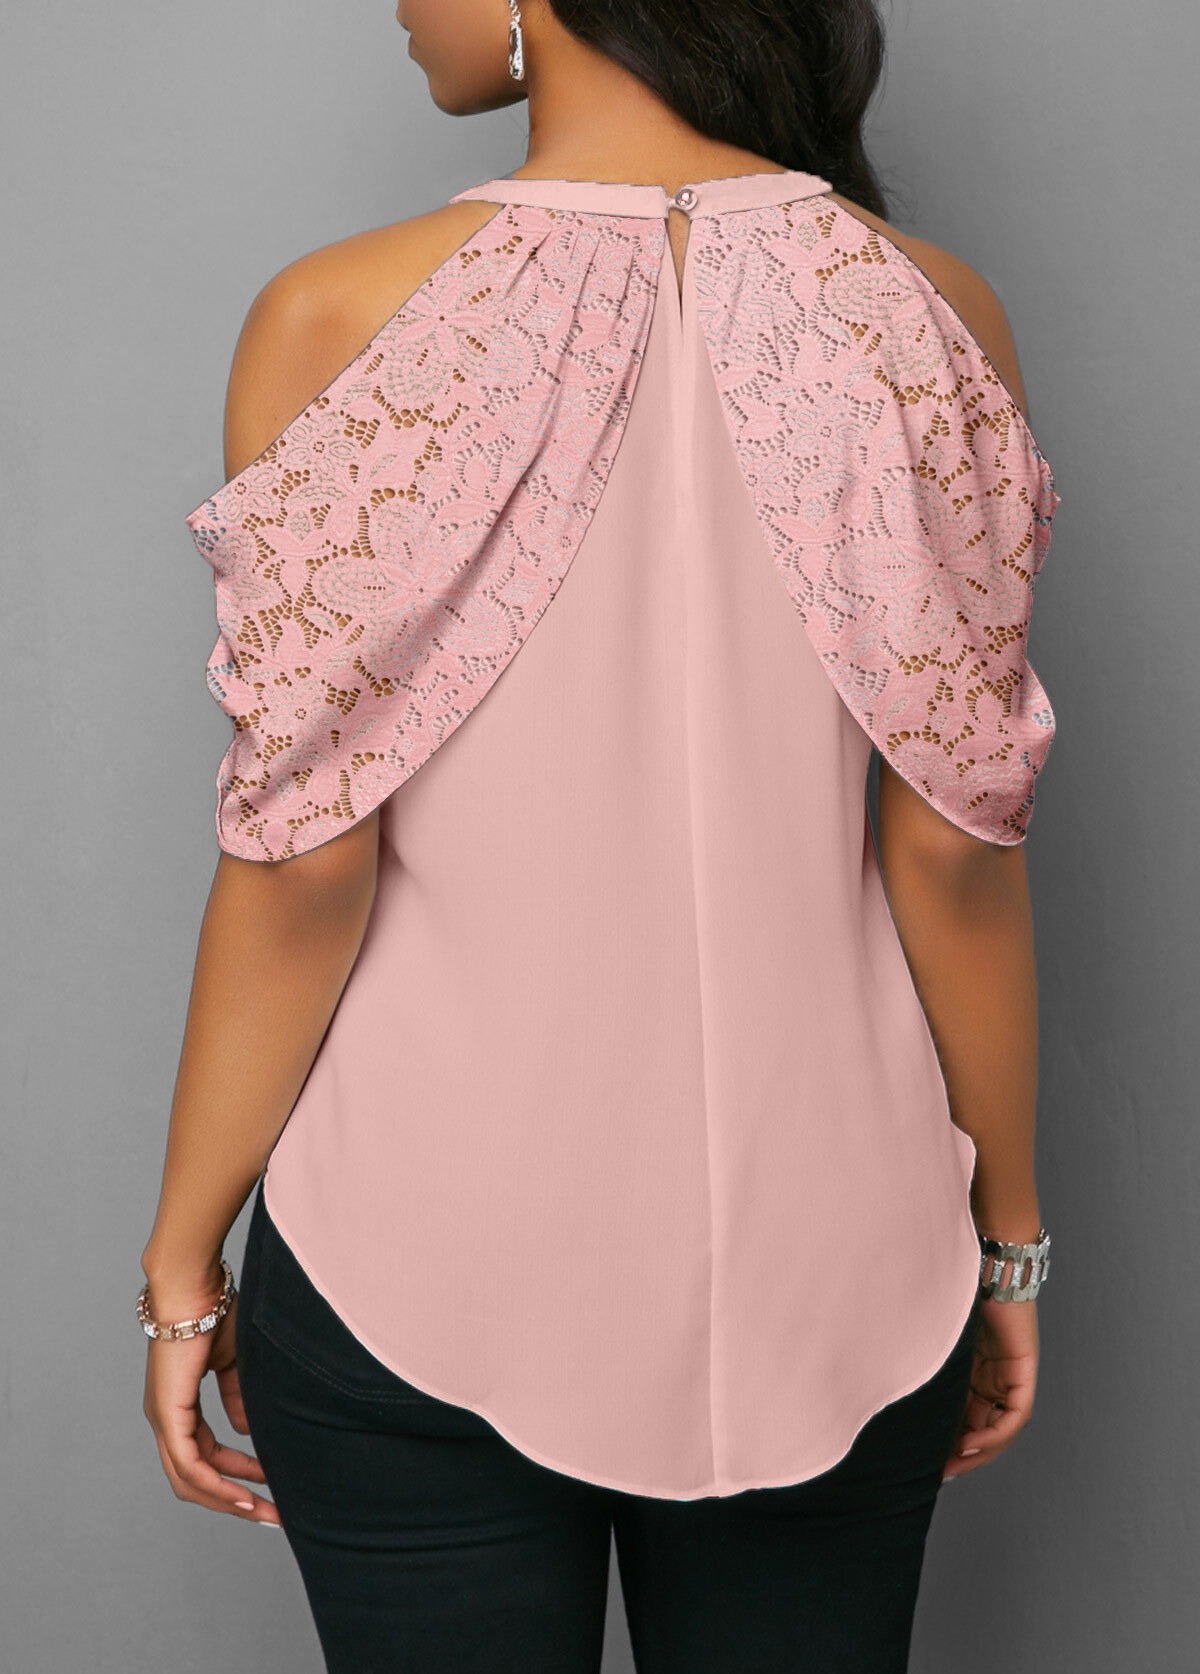 Bowknot Lace Stitching Cold Shoulder Pink Blouse